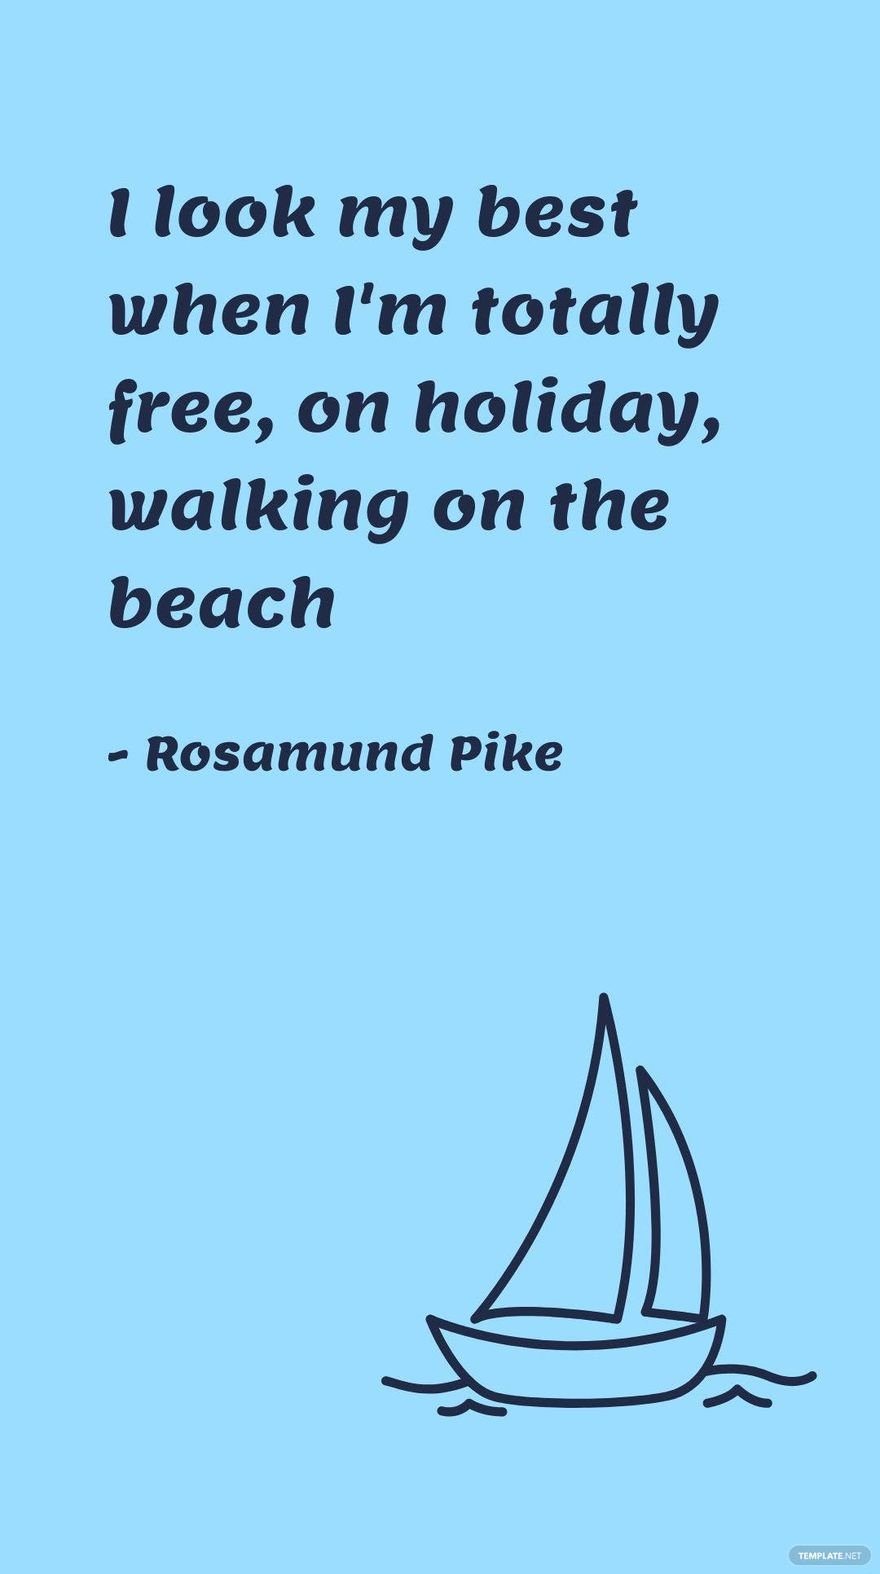 Rosamund Pike - I look my best when I'm totally free, on holiday, walking on the beach